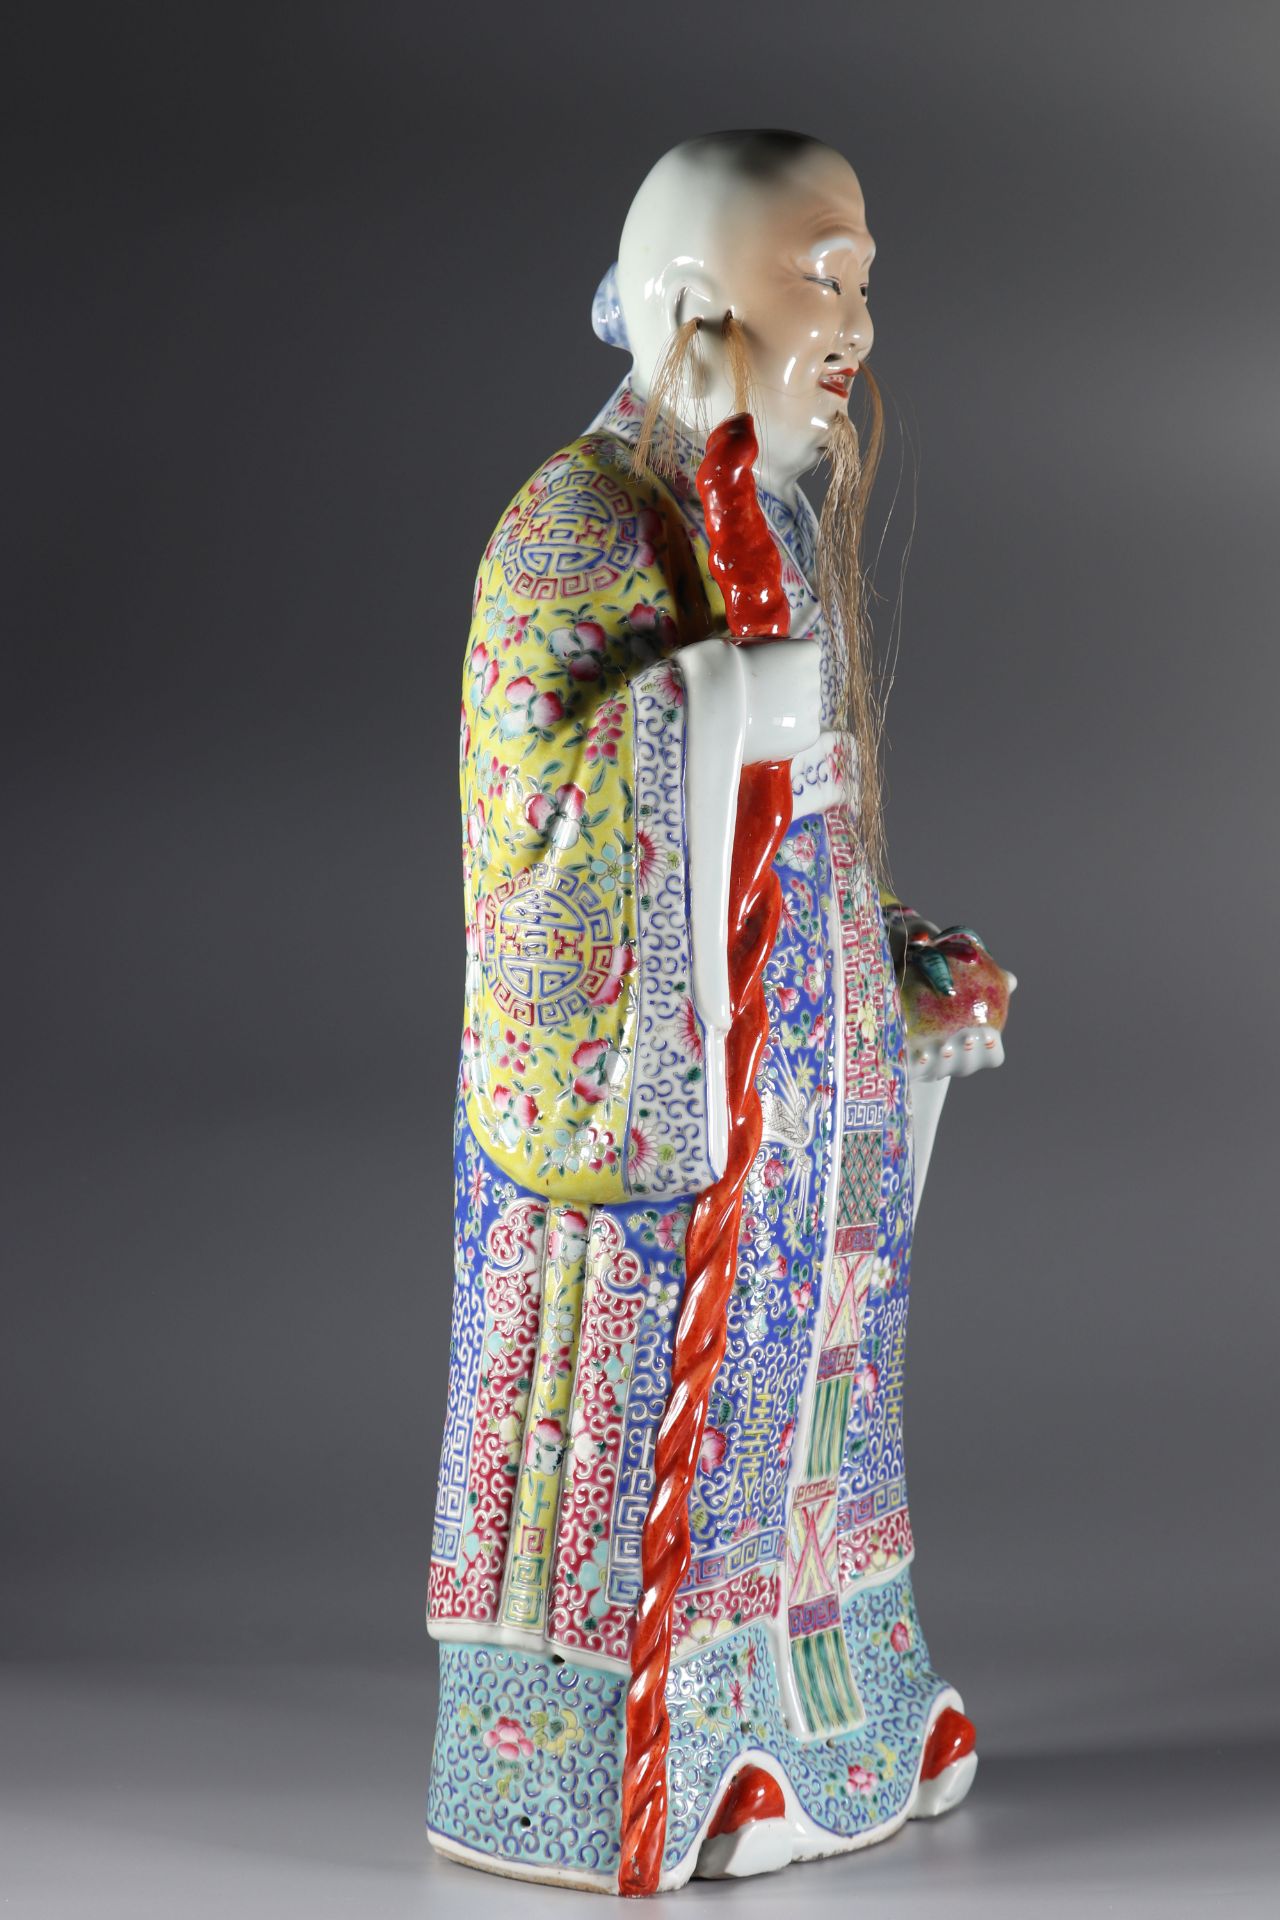 China porcelain statue from china republic period - Image 2 of 4